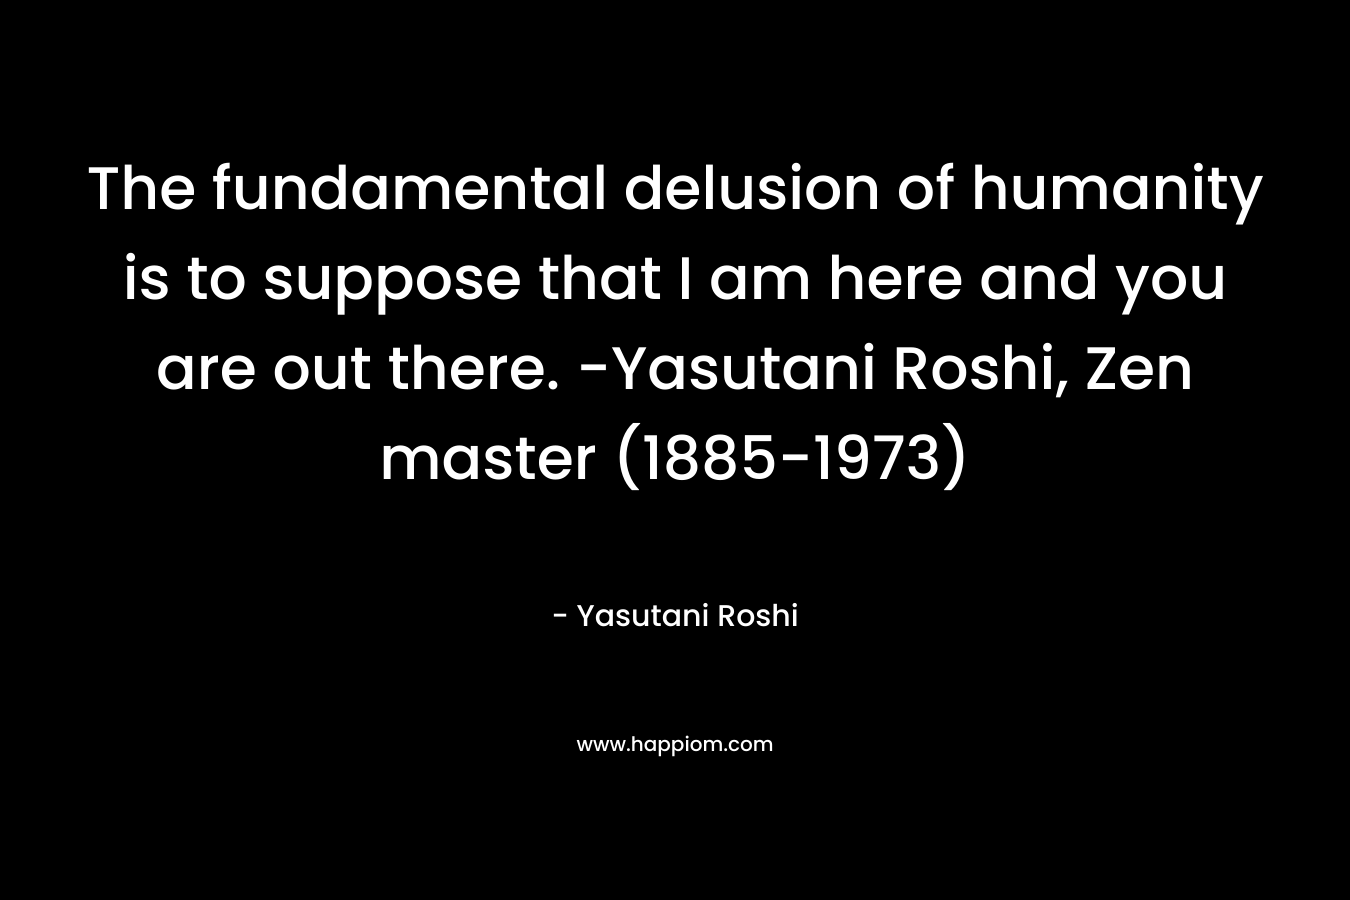 The fundamental delusion of humanity is to suppose that I am here and you are out there. -Yasutani Roshi, Zen master (1885-1973) – Yasutani Roshi